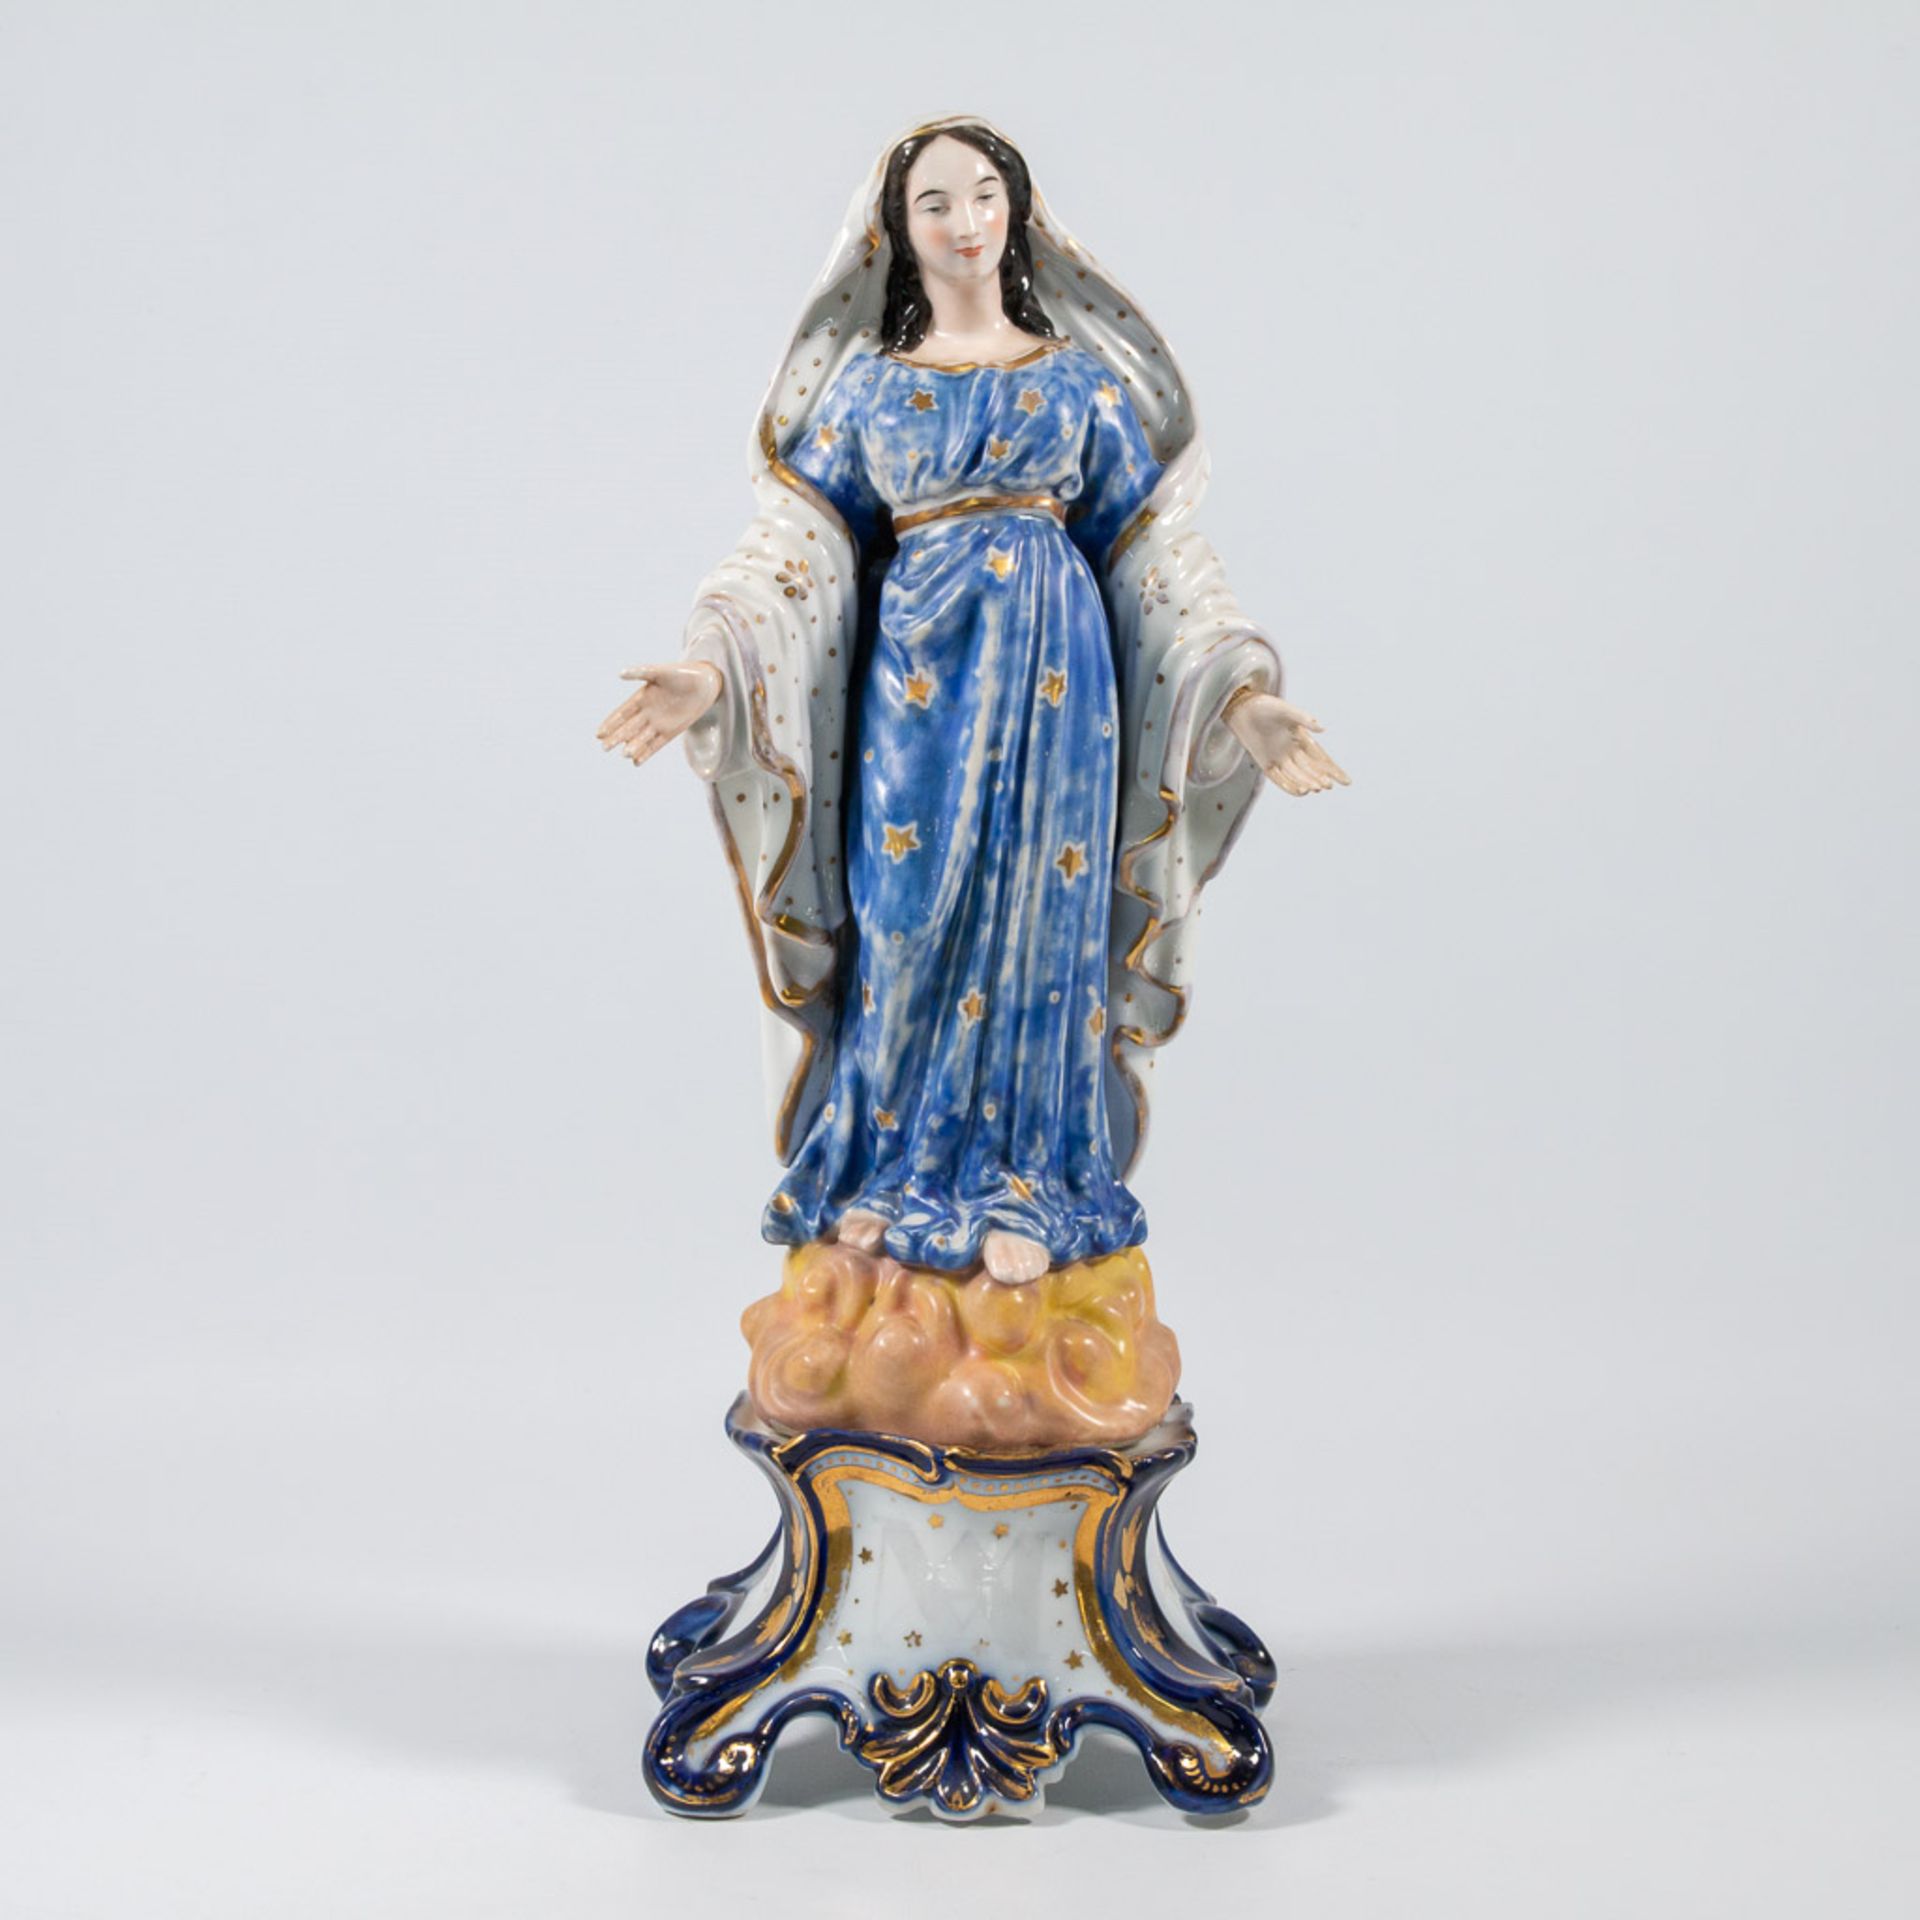 Madonna made of porcelain, 19th century